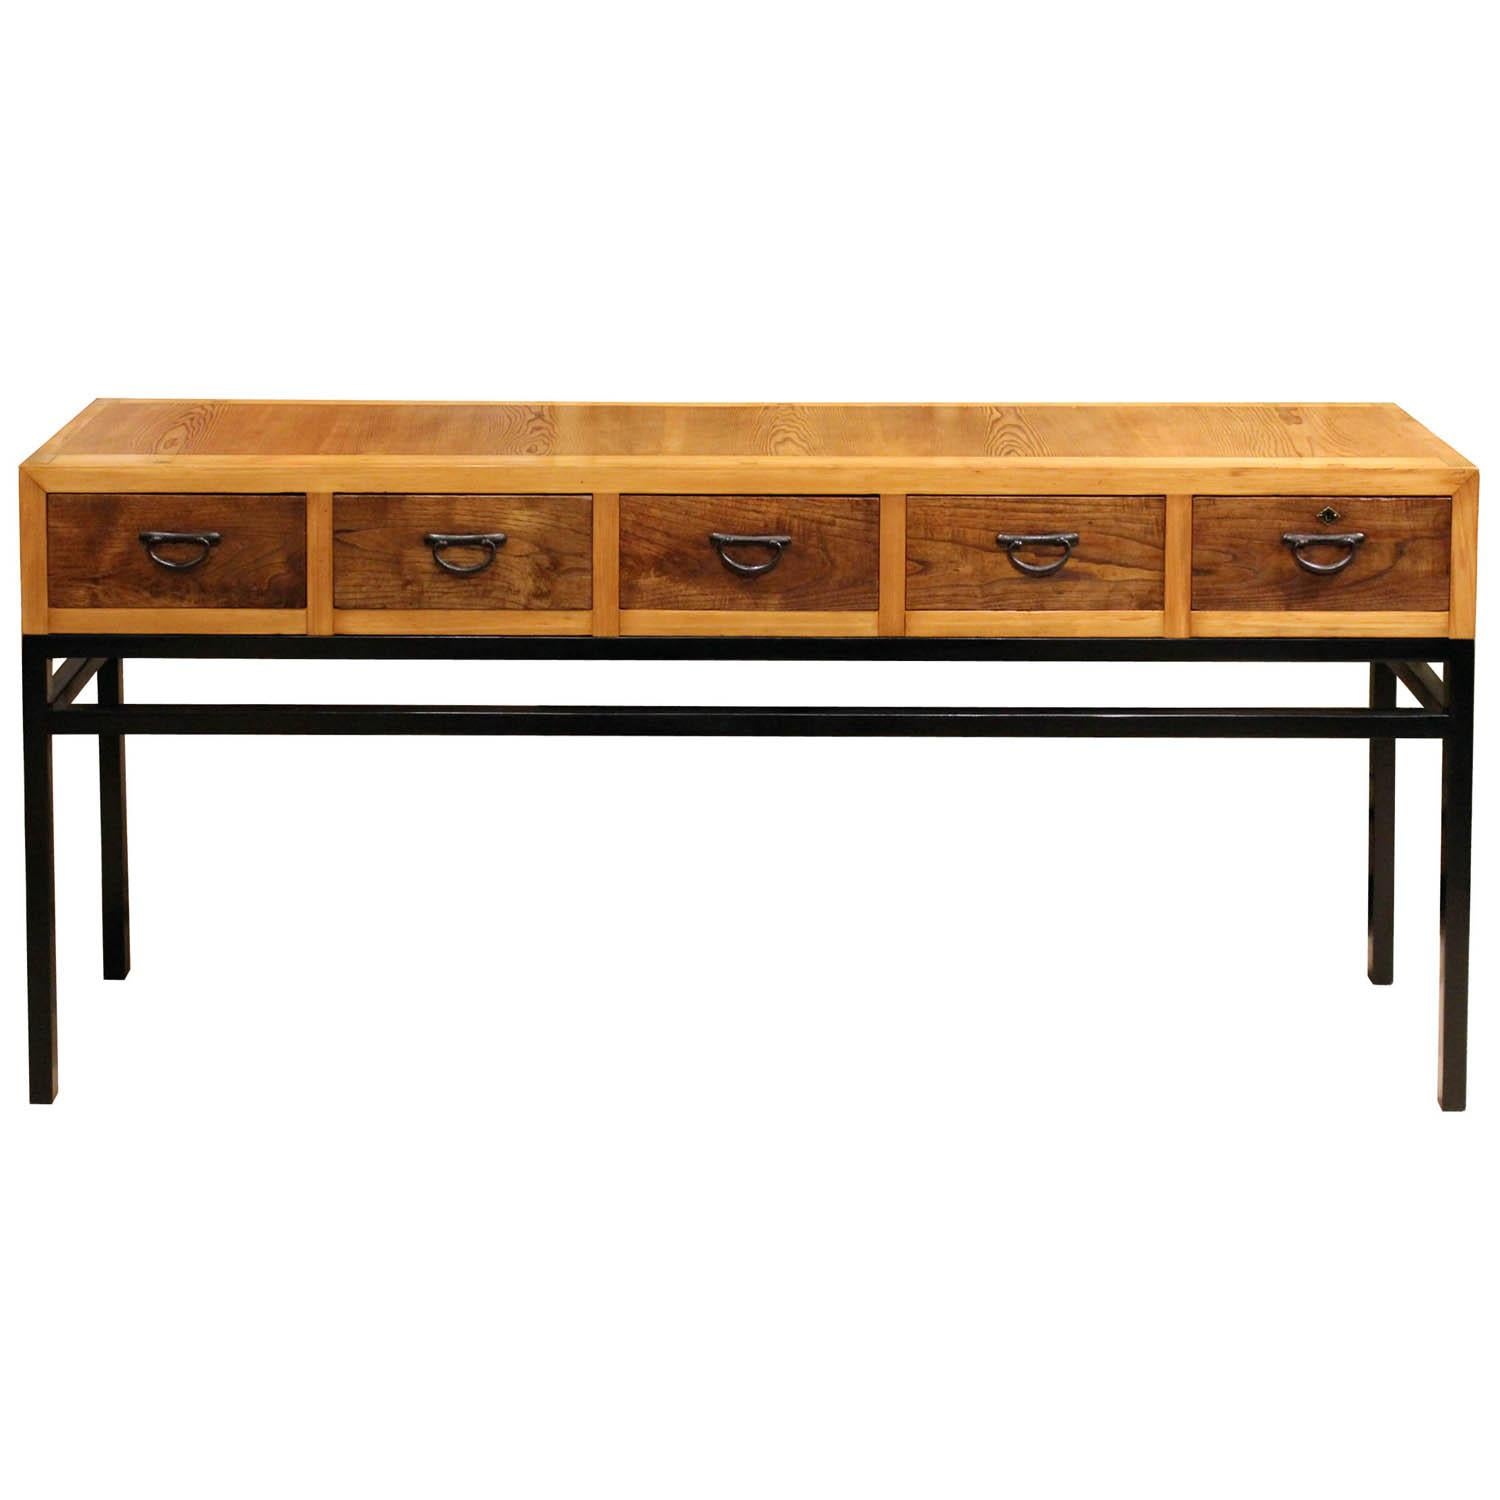 Japanese 5-Drawer Console Table